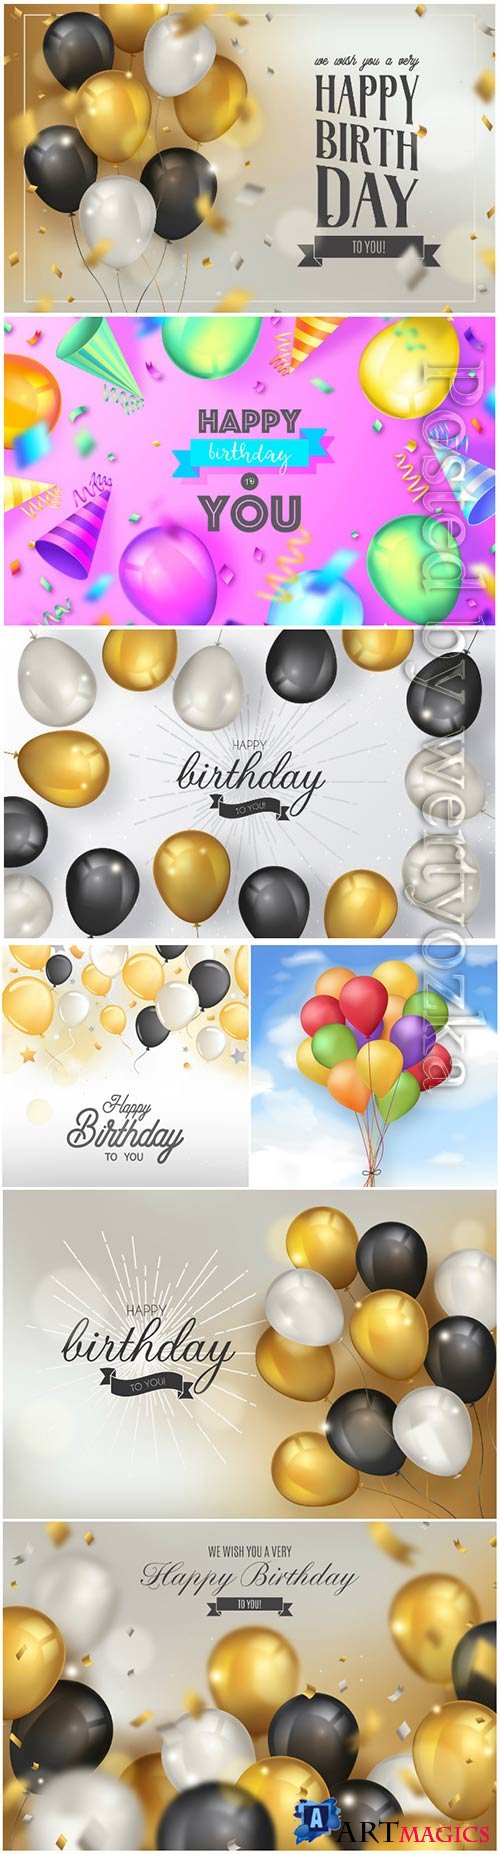 Elegant birthday vector background with realistic balloons